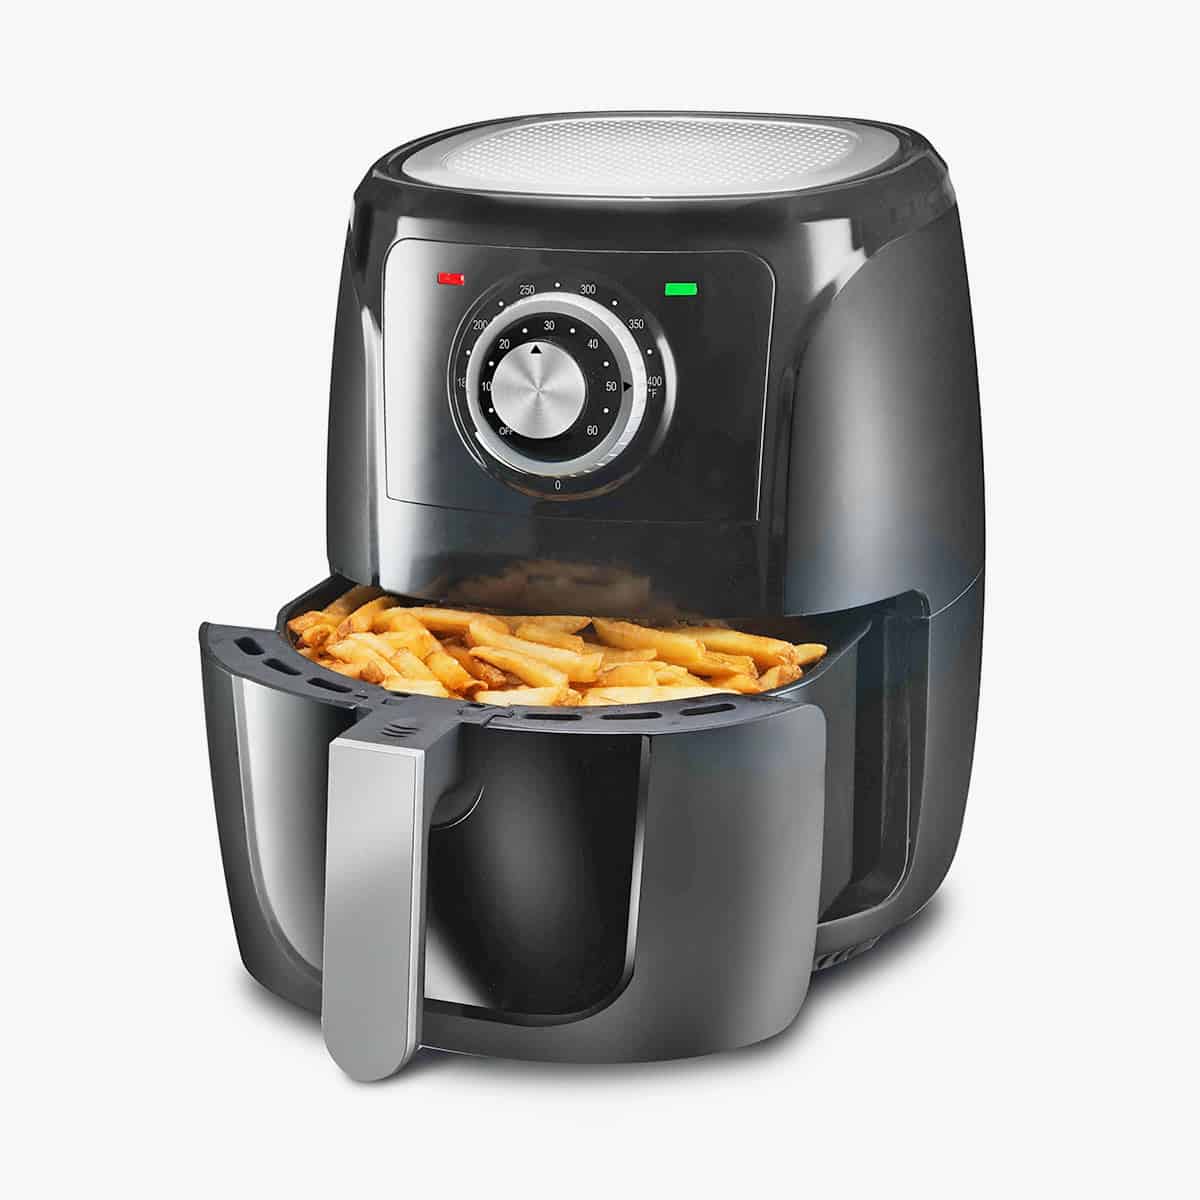 Small portable air fryer with french fries in the basket